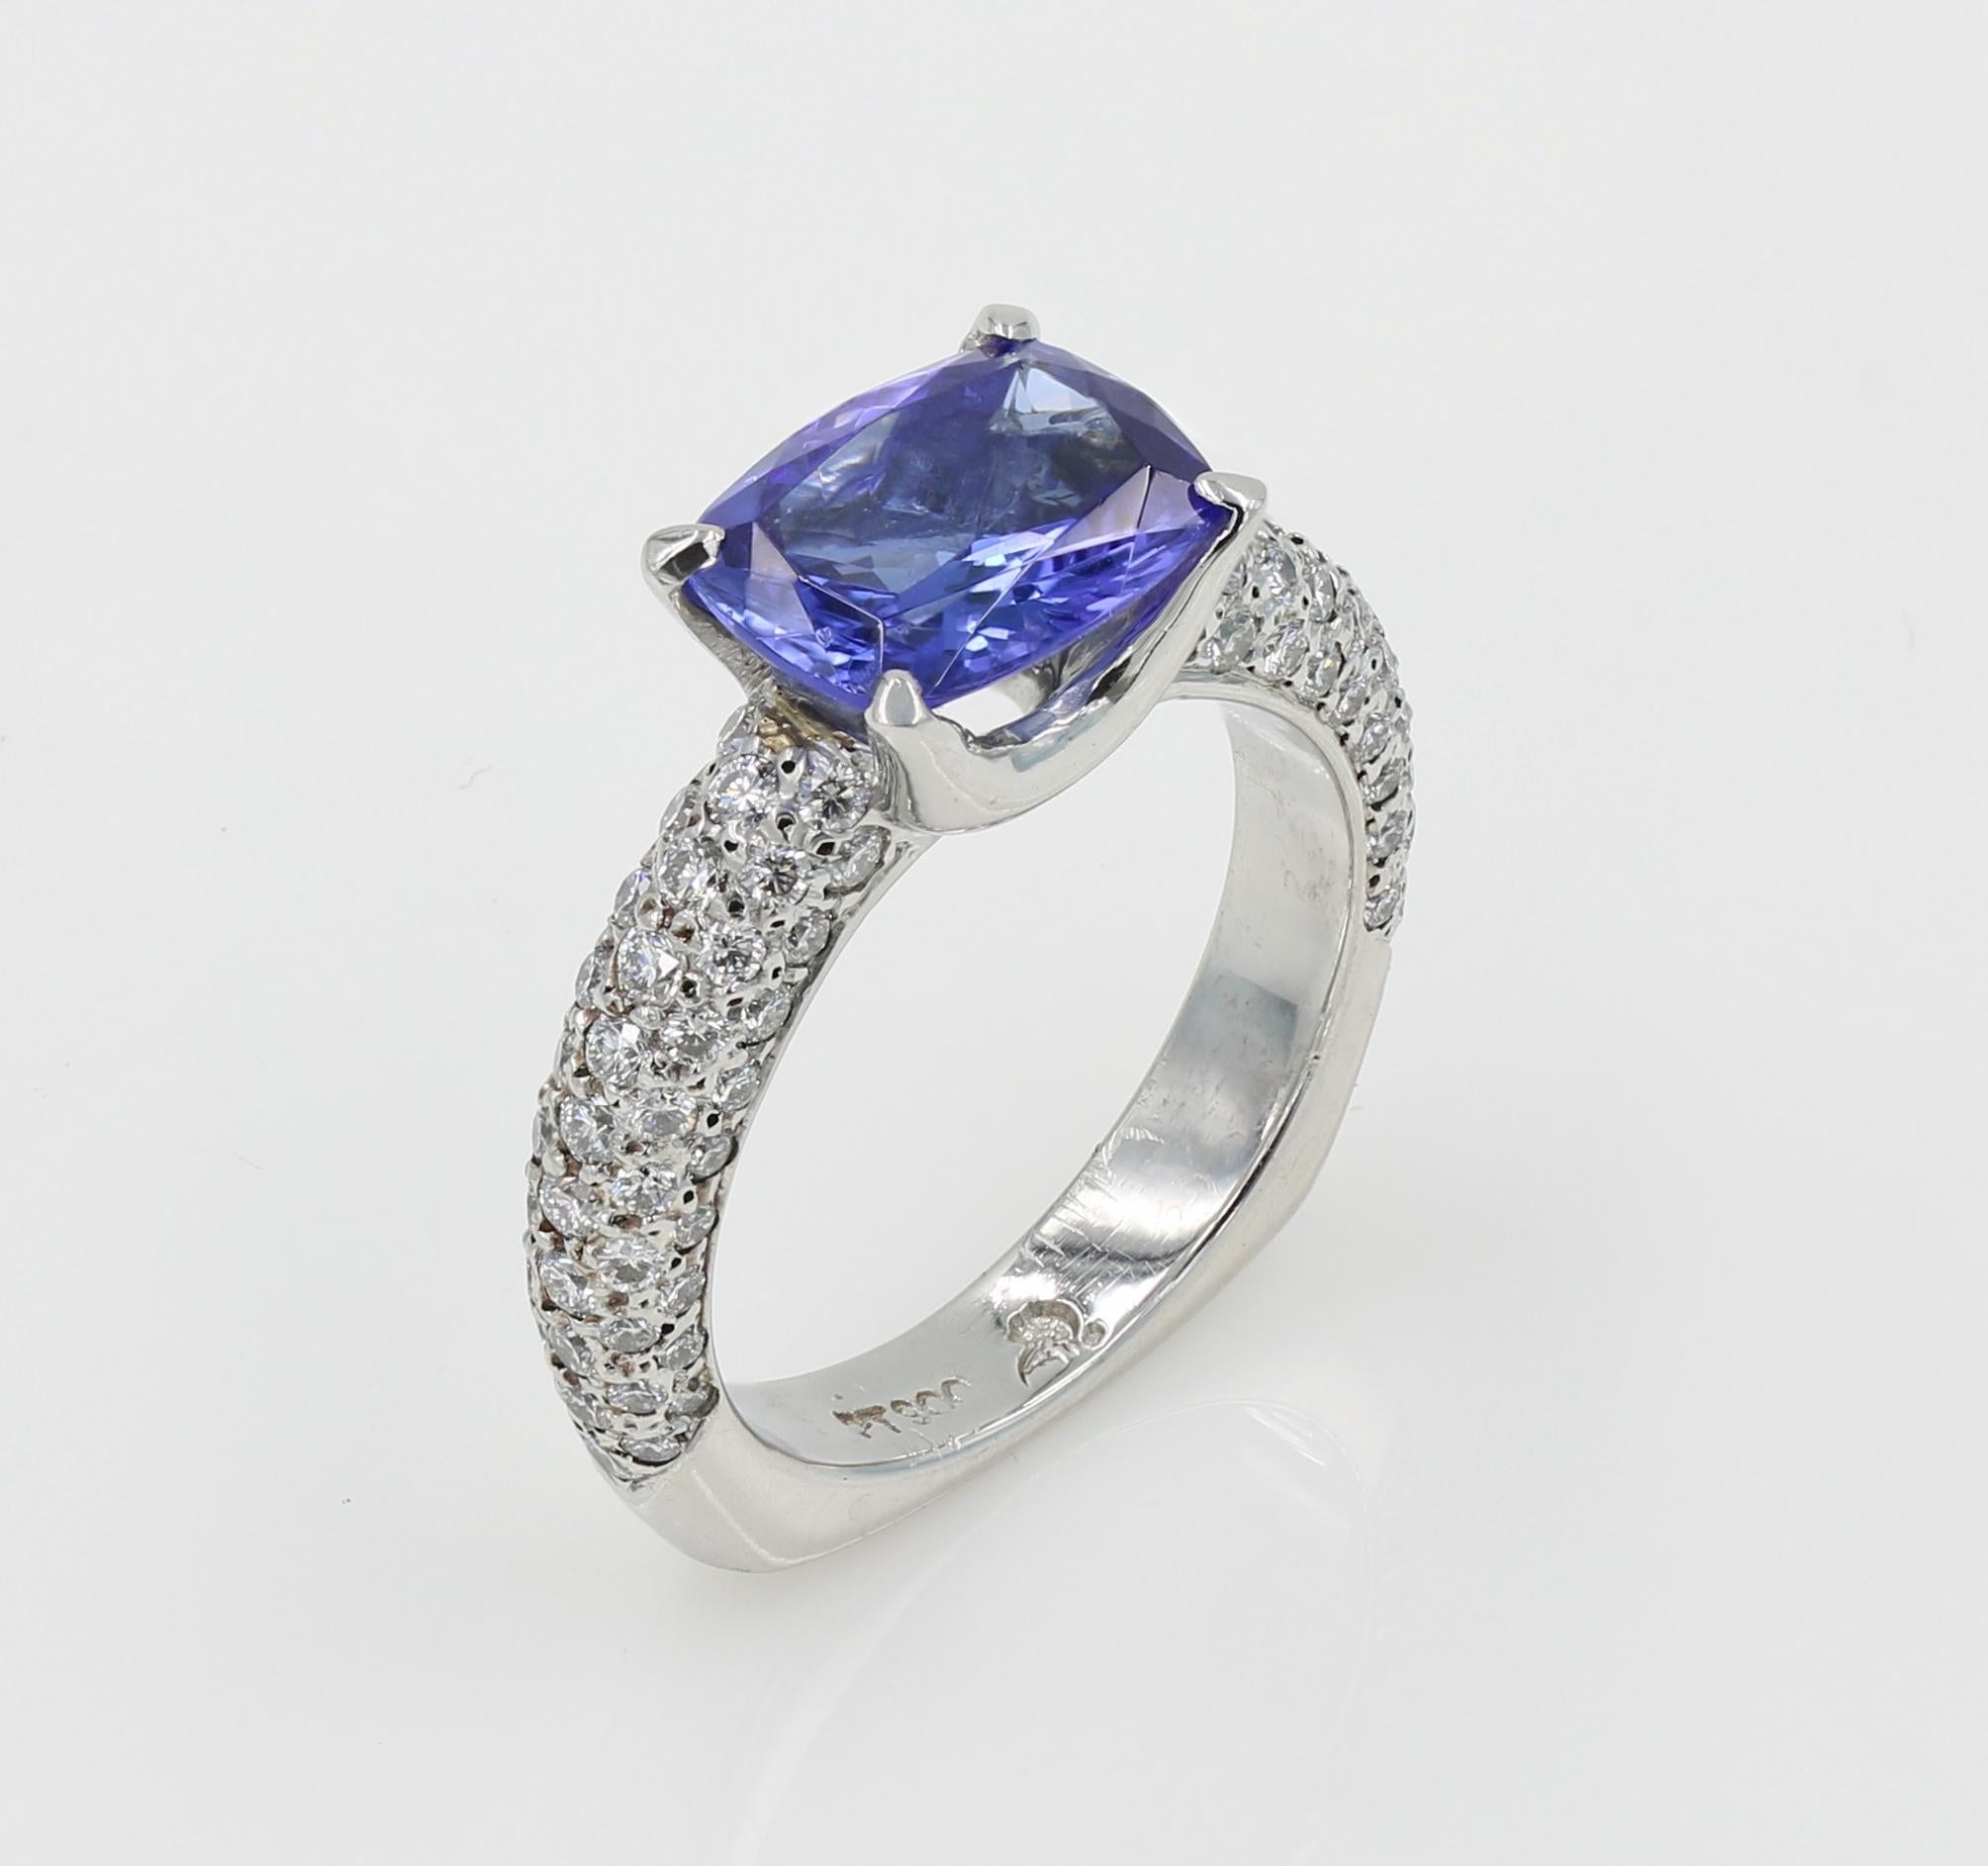 2.49cts. Cushion cut Tanzanite and Natural Diamond ring in Platinum.

96 Natural Ideal Cut Diamonds (G-H VS) weighing 0.95ct total. Pave set in Platinum with the Tanzanite set in the center. 
Ring is a Lester Lampert original creation in a size 6.